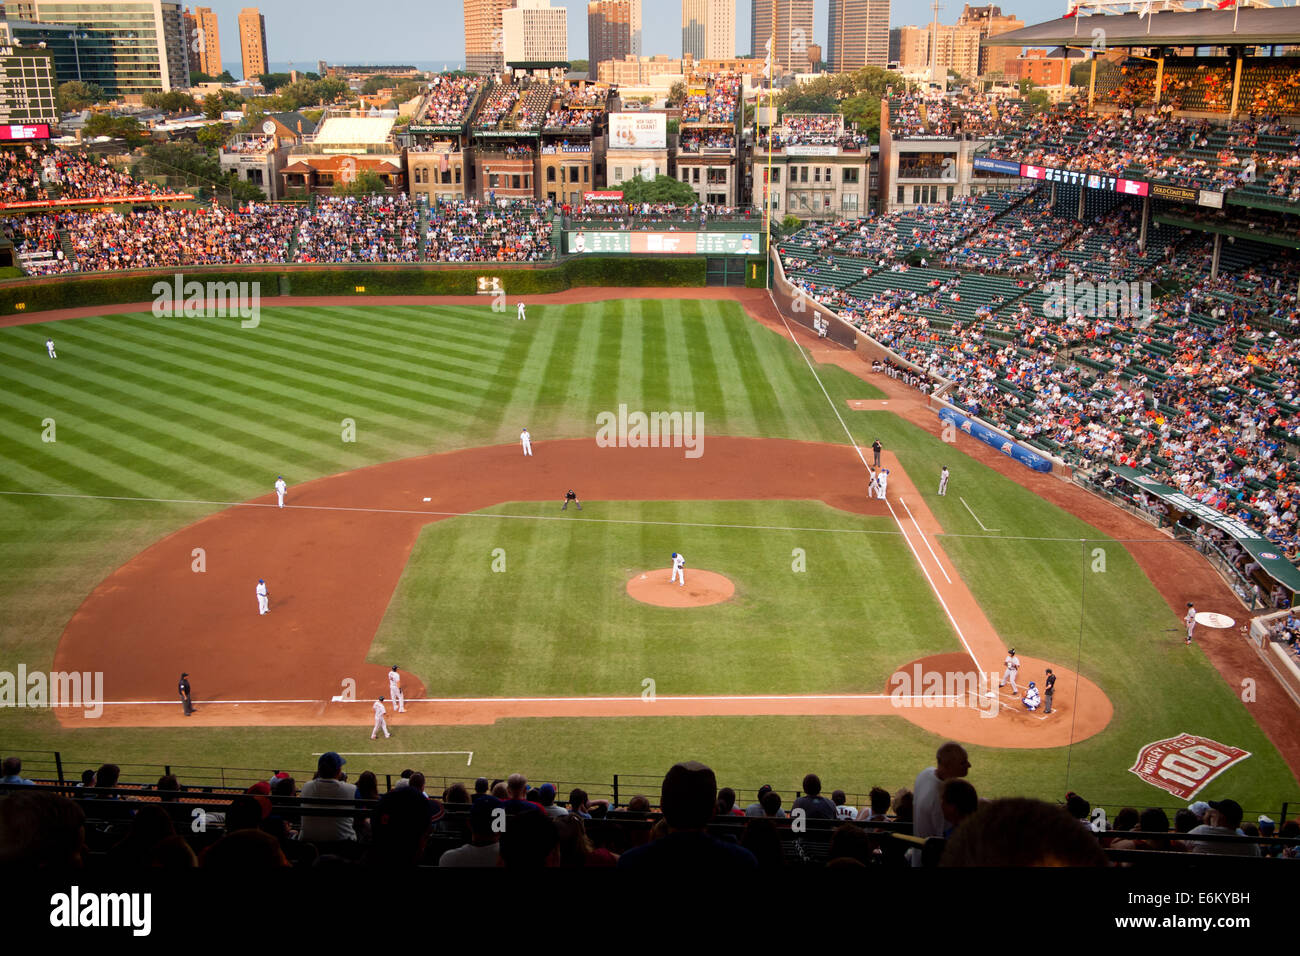 A view of Wrigley Field during a night game between the San Francisco Giants and Chicago Cubs on August 20, 2014. Stock Photo